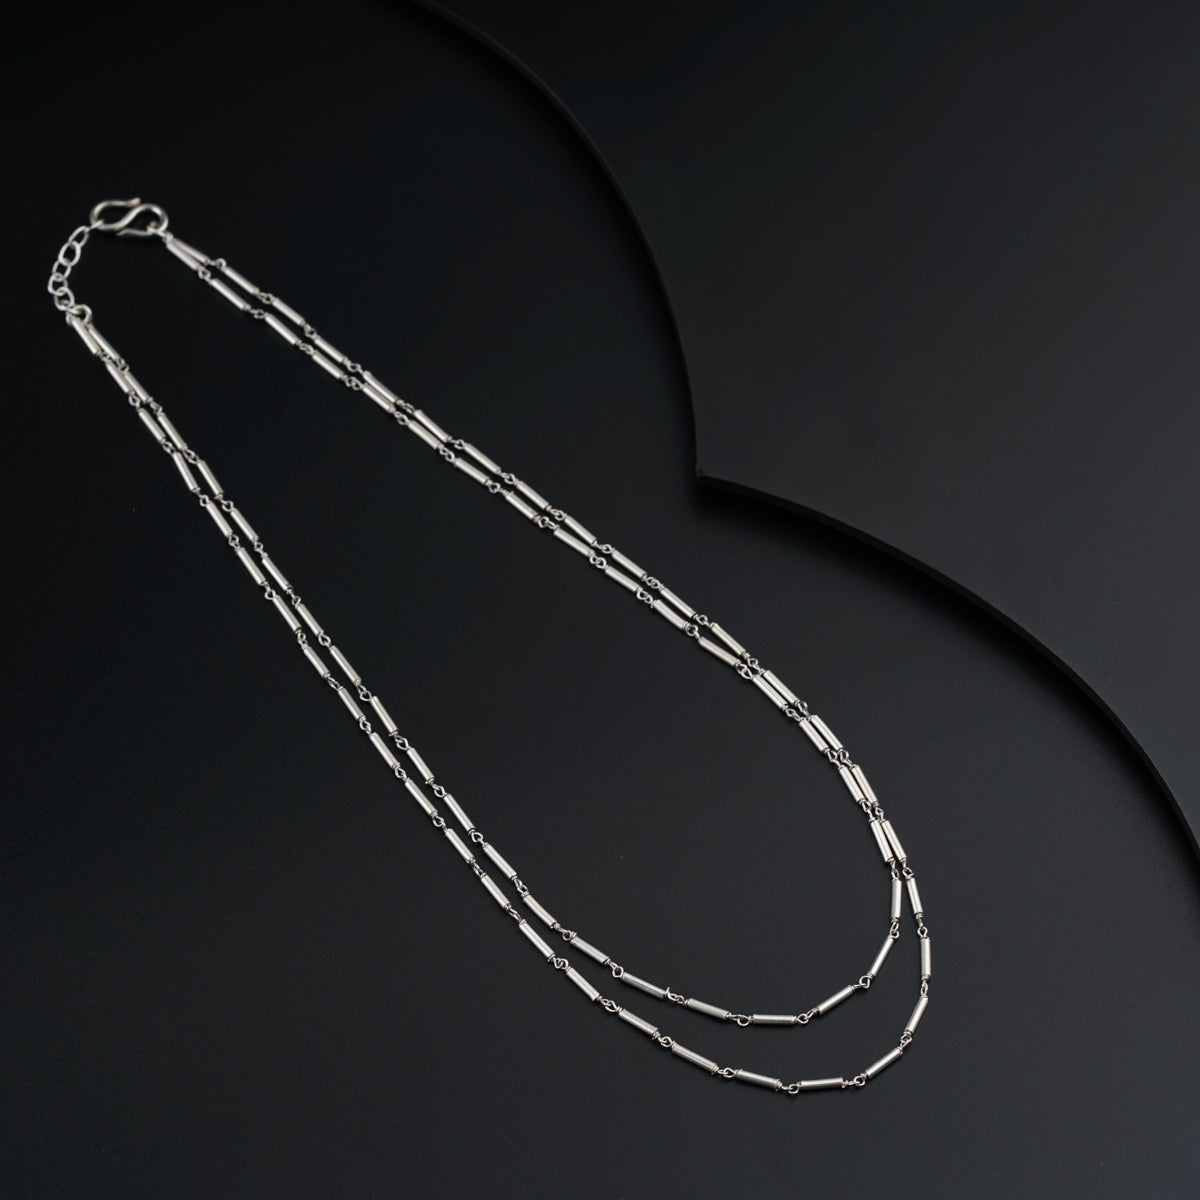 a long silver necklace with a long chain on a black background